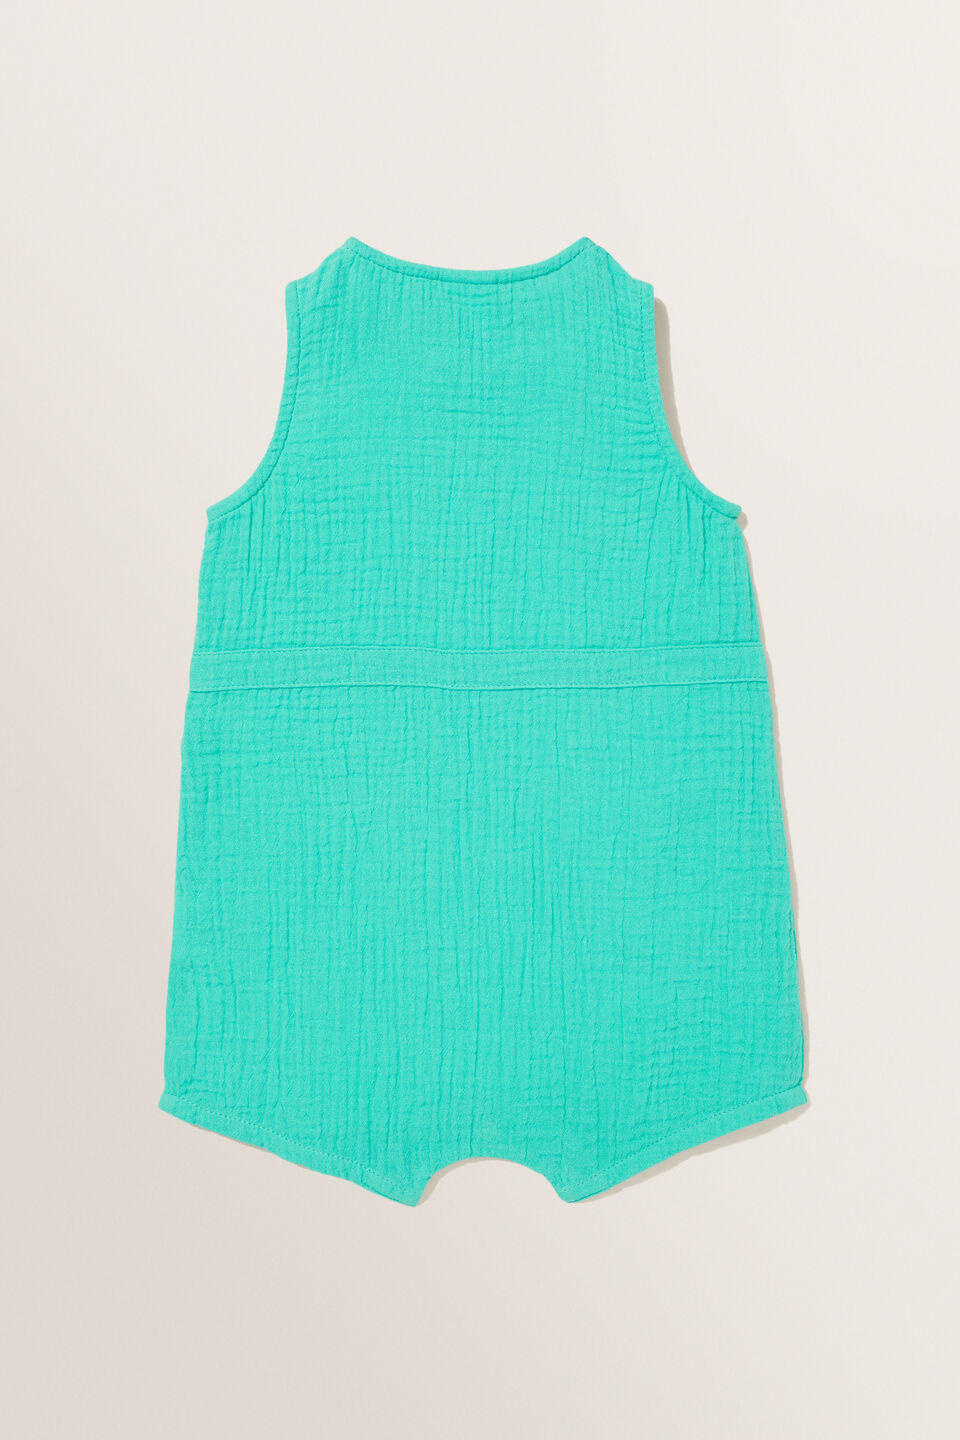 Cheesecloth Pocket Romper  Emerald Green